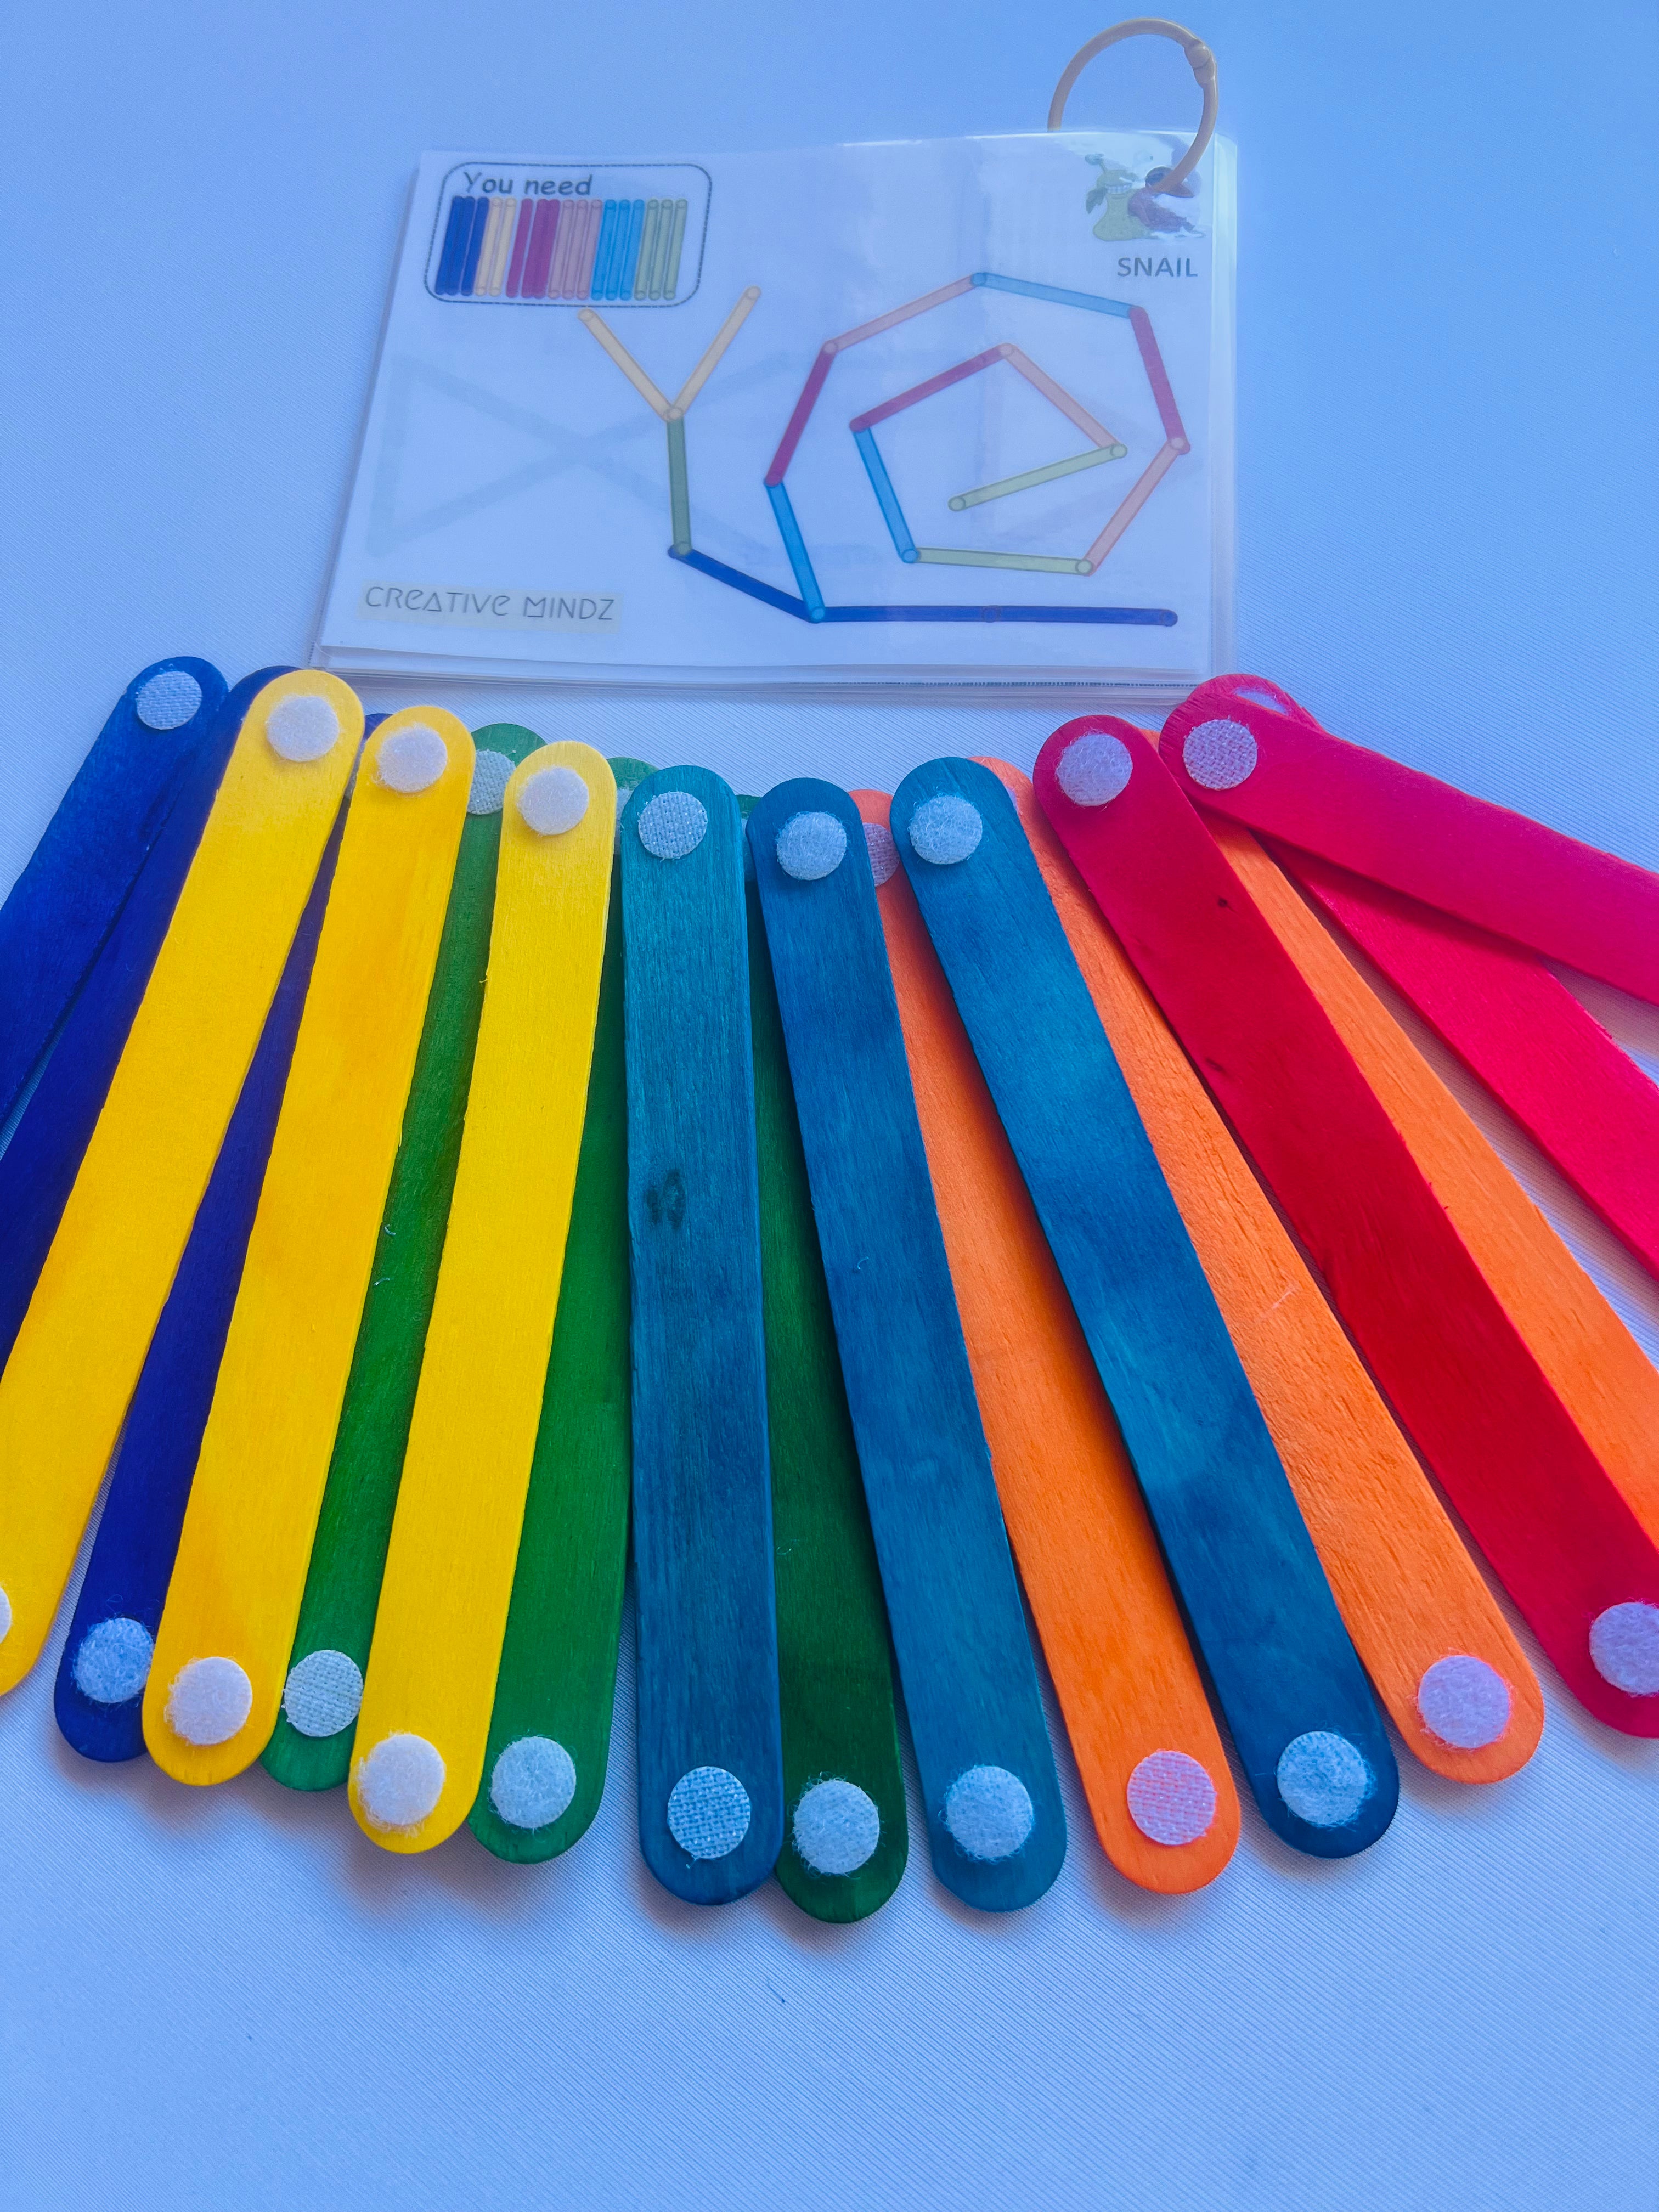 Popsicle Kit - Creative mindz - busy bags for busy kids 